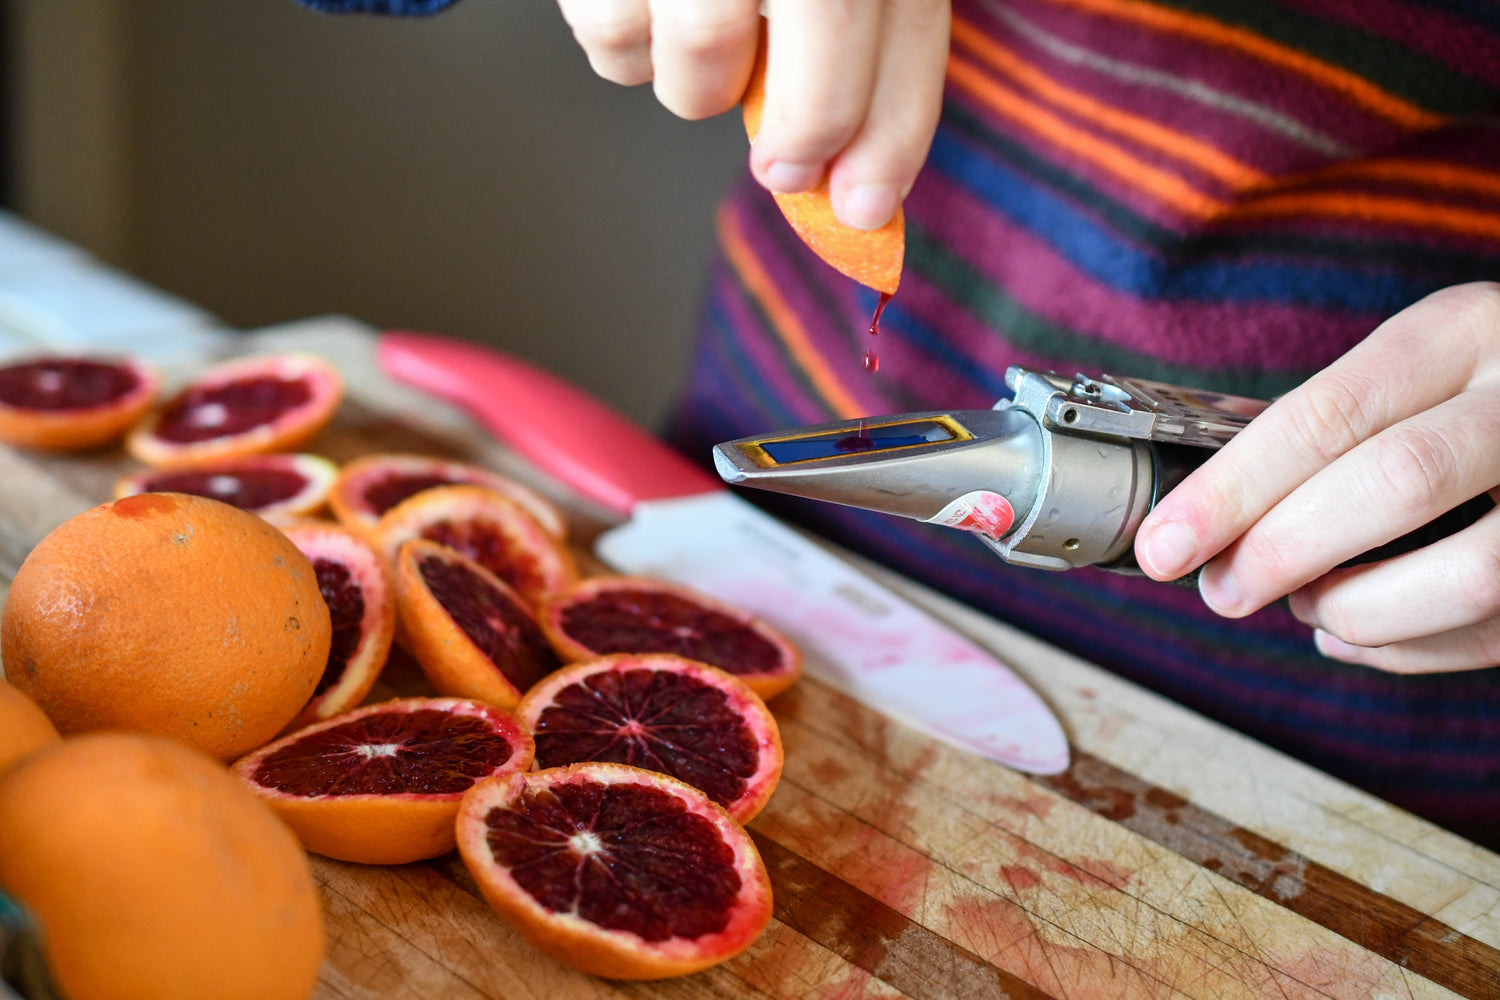 Brixing Moro blood oranges using a refractometer